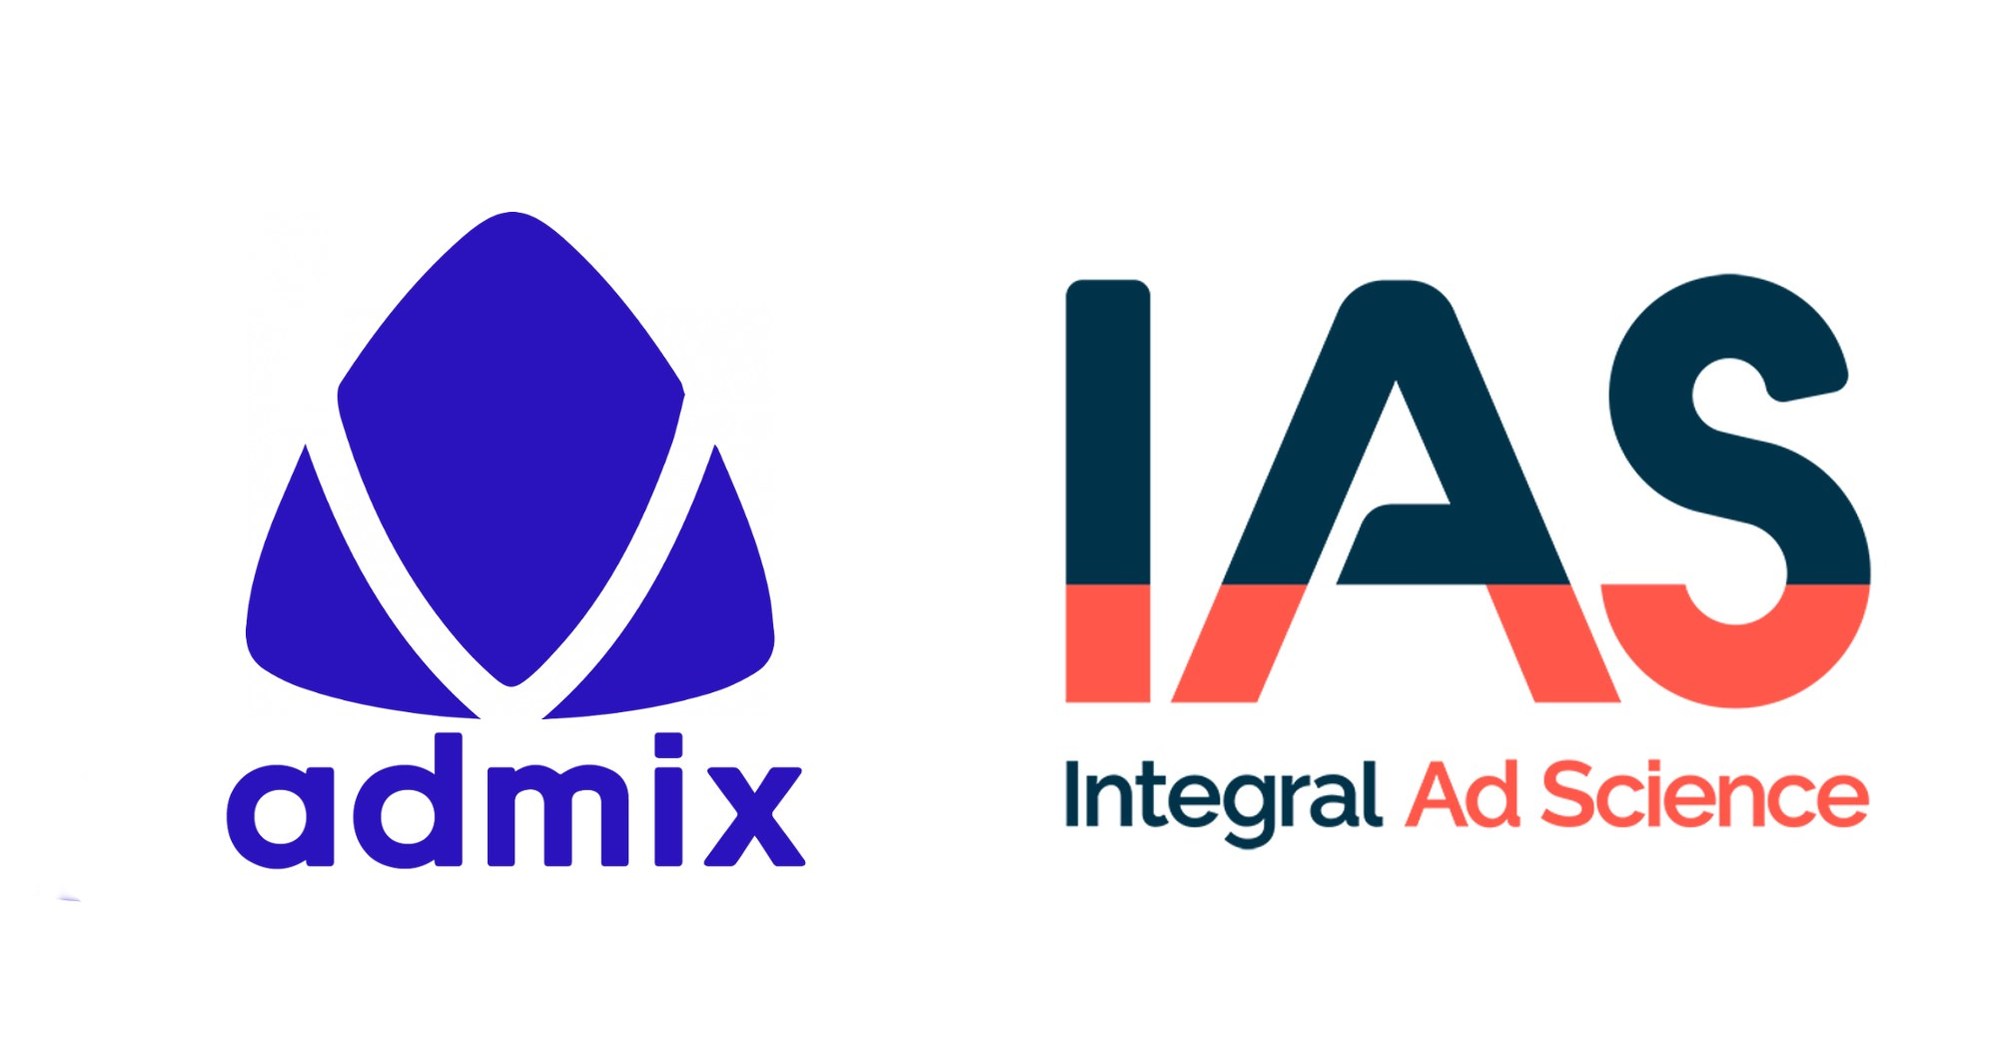 Admix In-Play Advertising Verified for the First Time by IAS